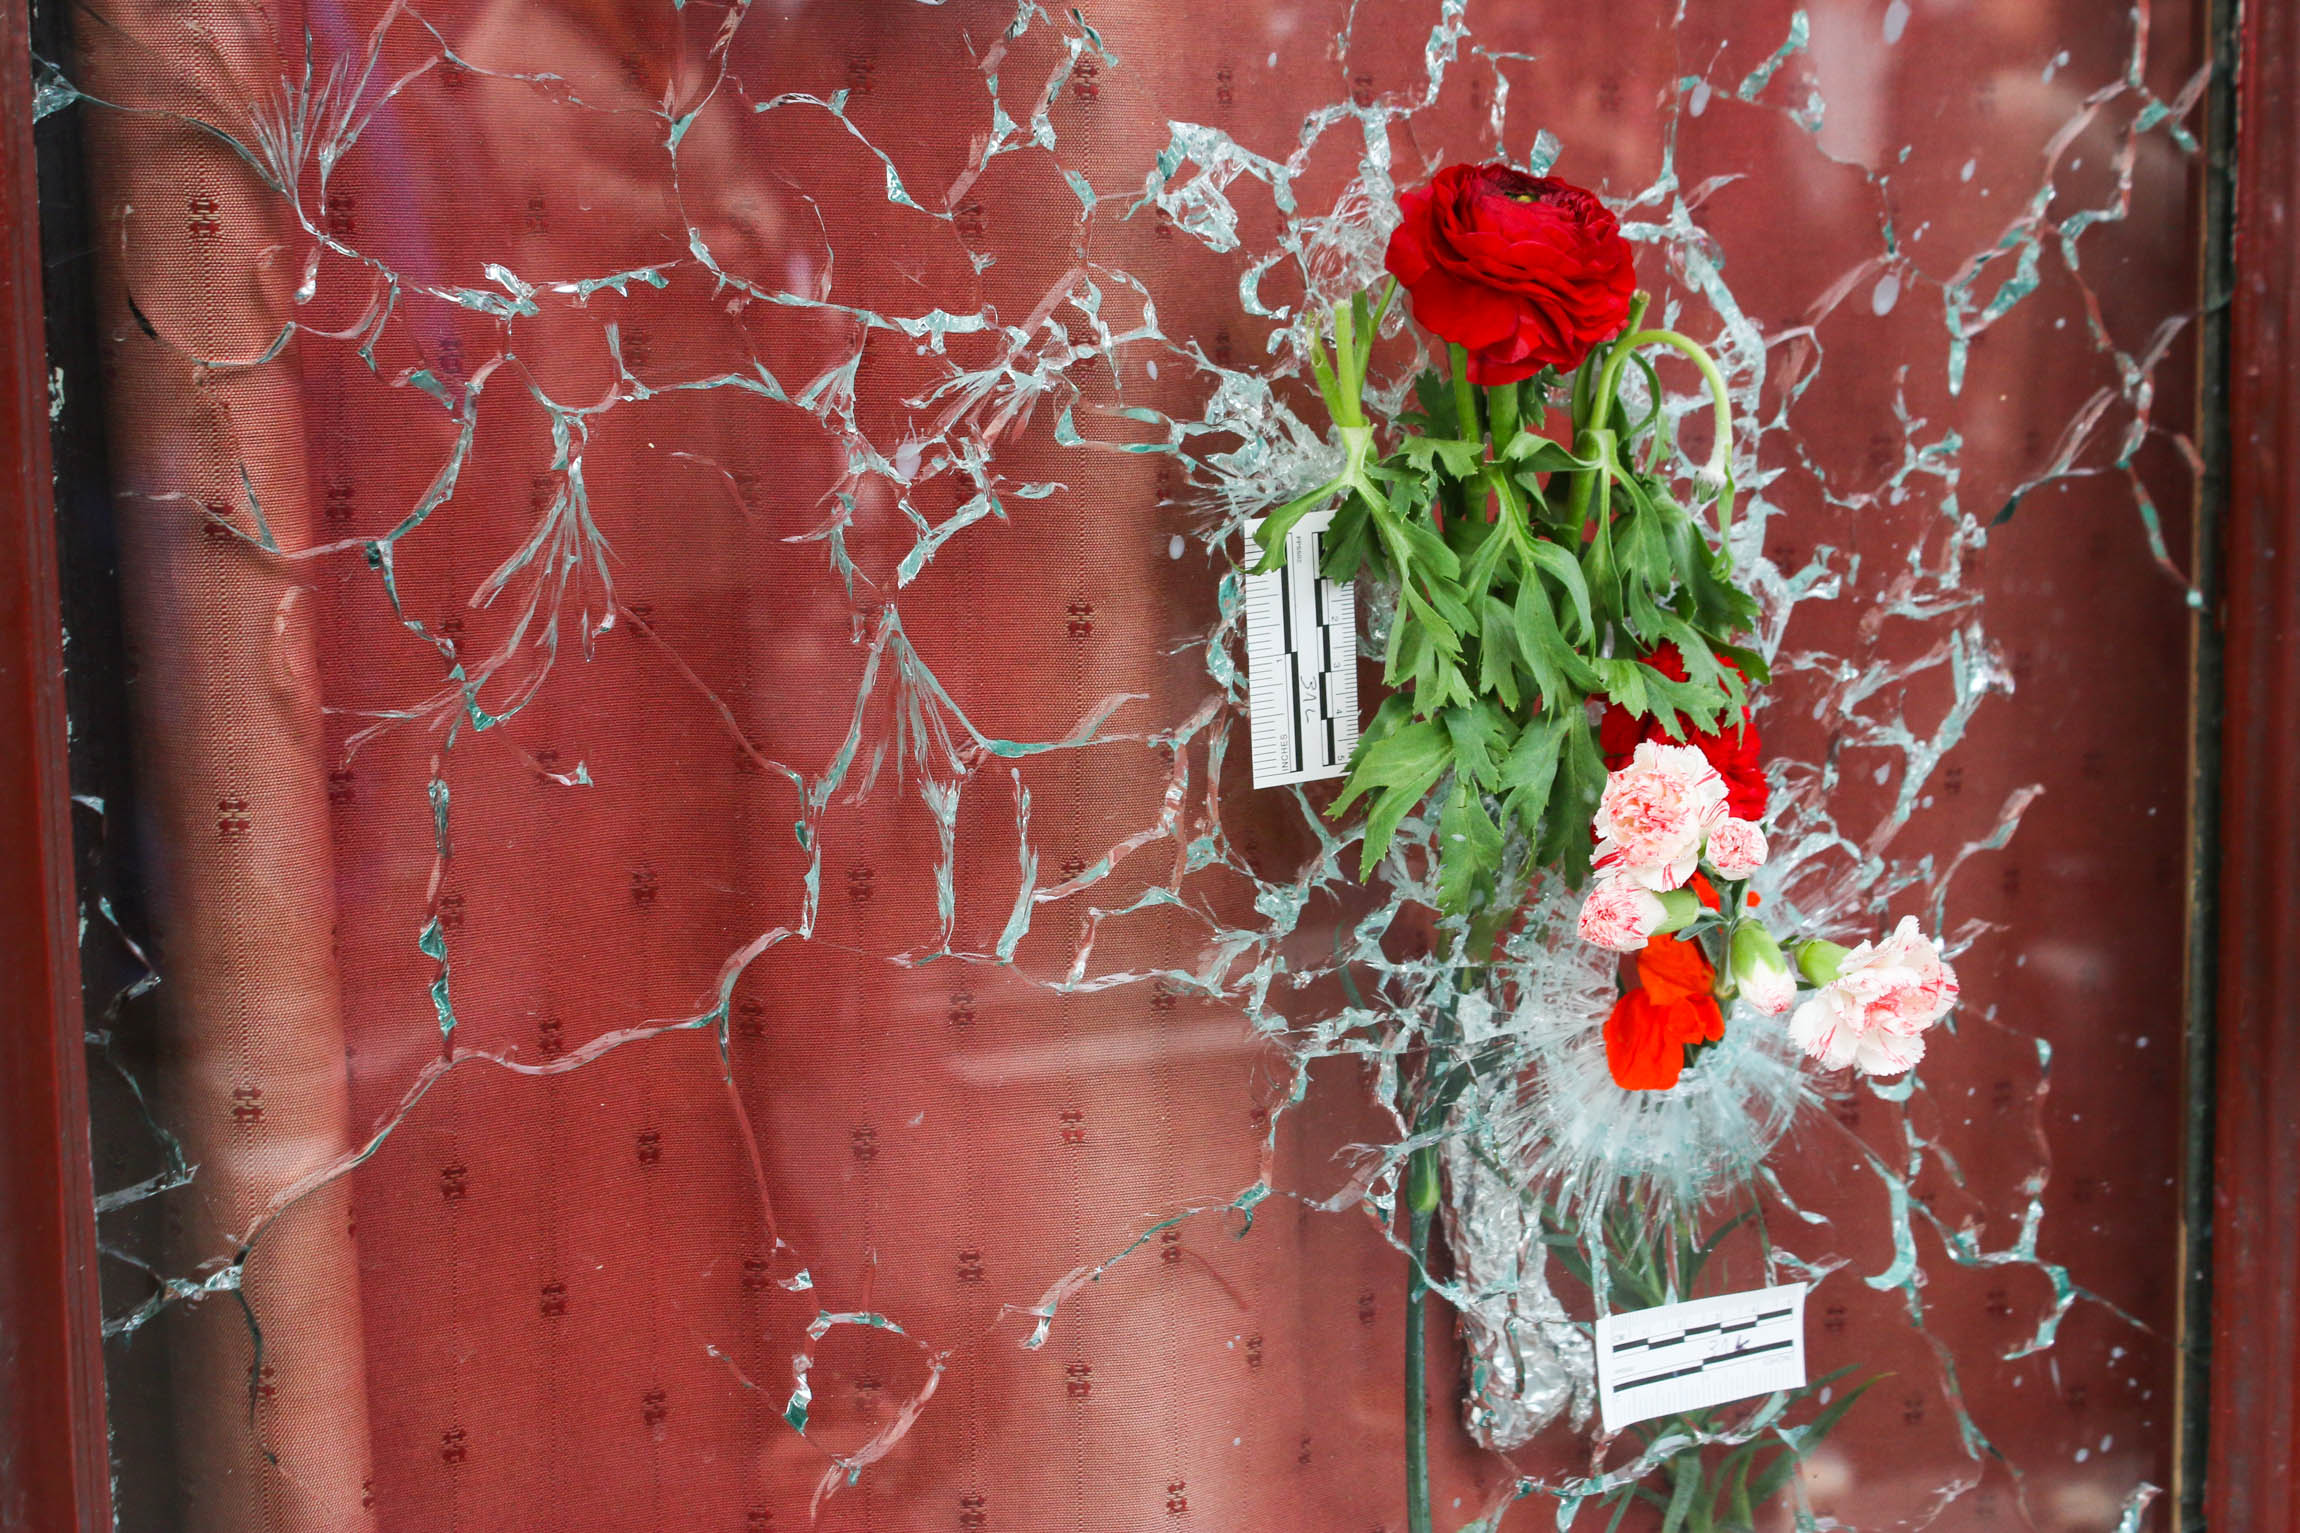 Flowers have been placed in a bullet hole at the Carillon restaurant in Paris, Nov 2015.